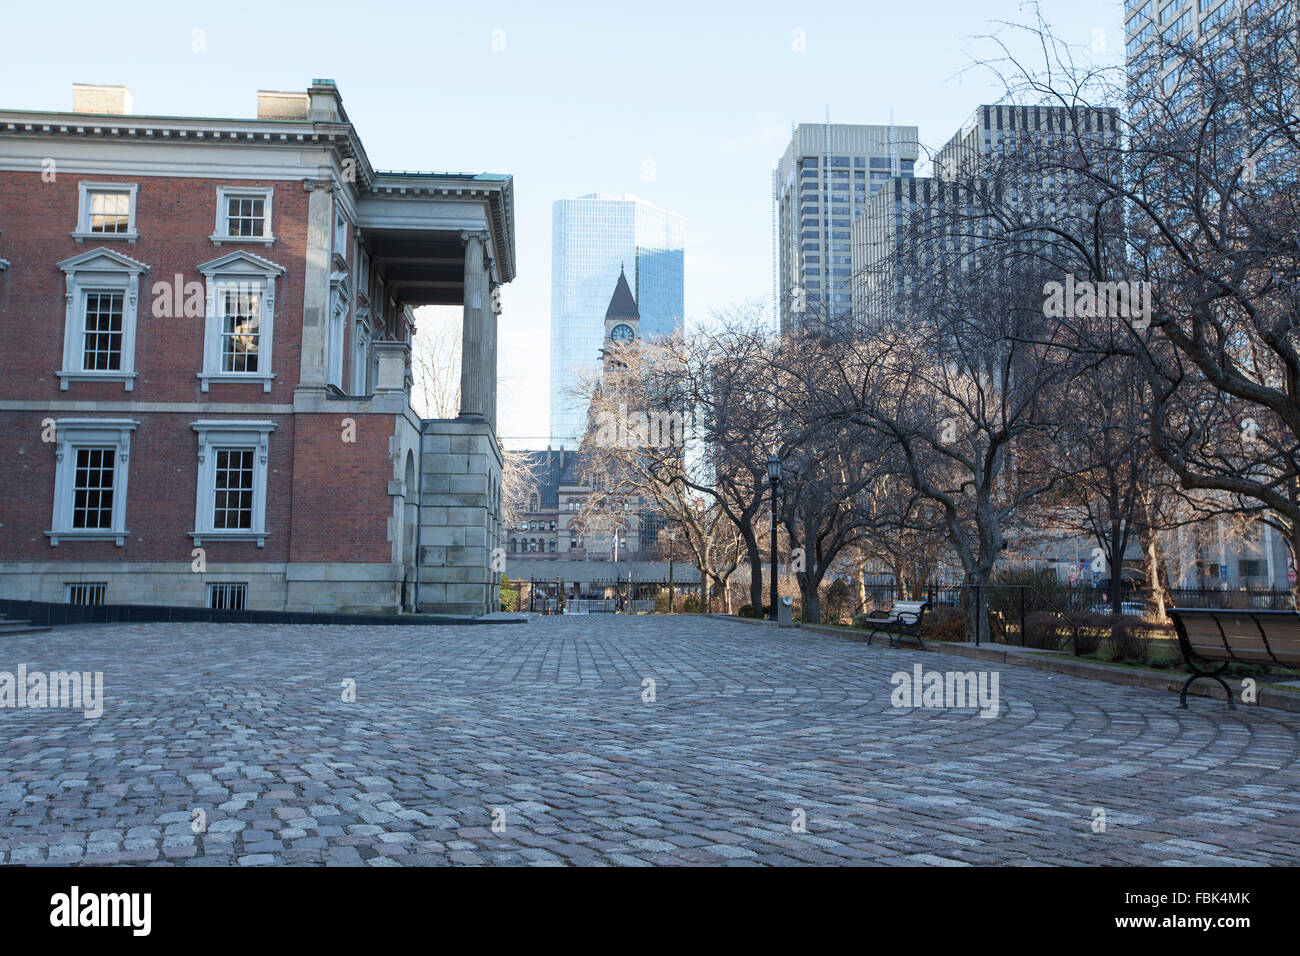 TORONTO - DECEMBER 24, 2015: Osgoode Hall is a landmark building in downtown Toronto constructed between 1829 and 1832 in the la Stock Photo